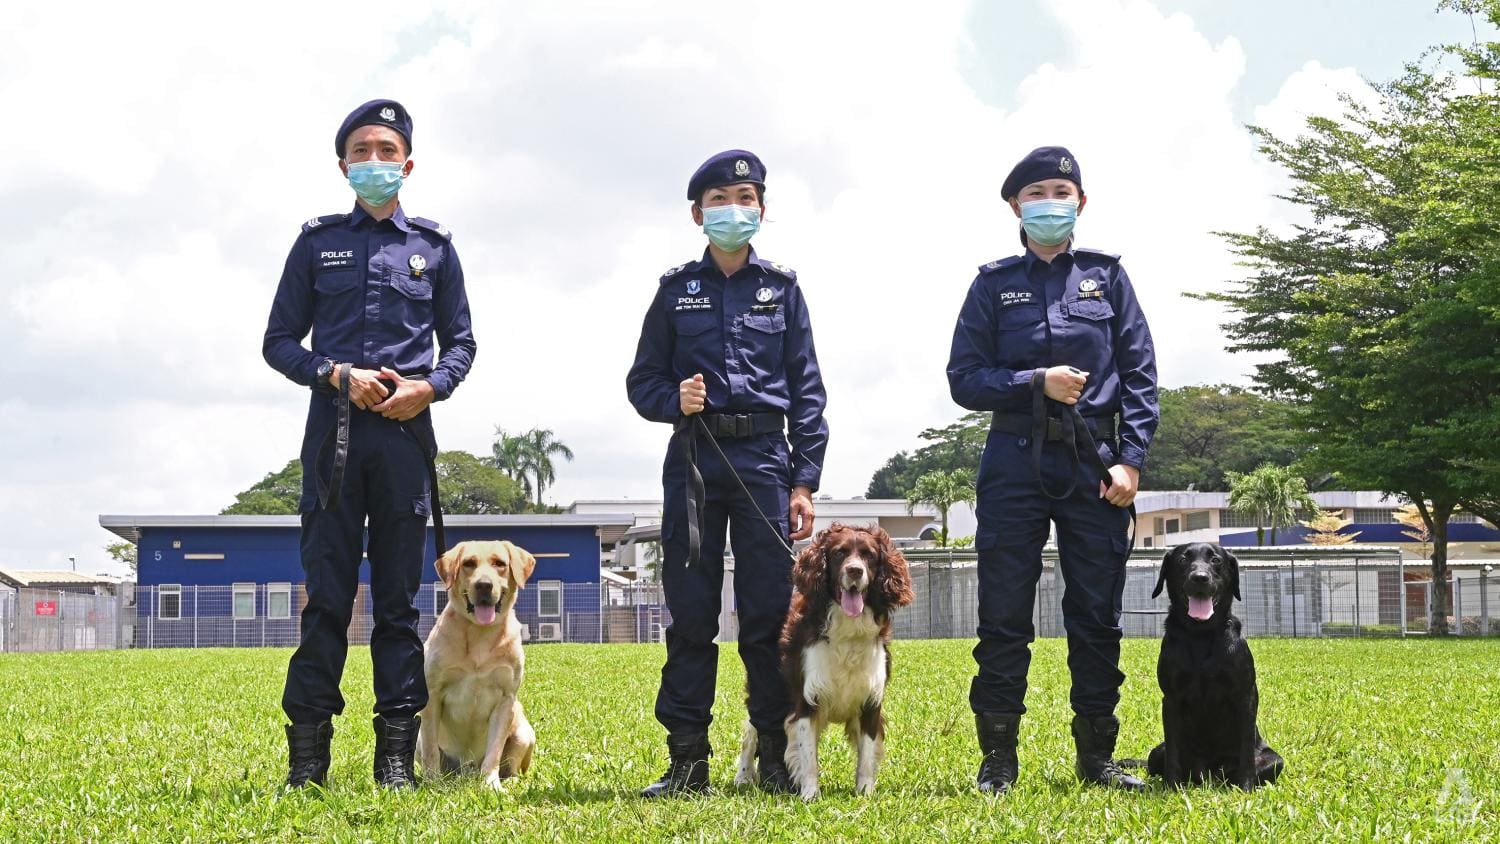 'Good boy!': How police dogs are trained to sniff out drugs, explosives or find missing people